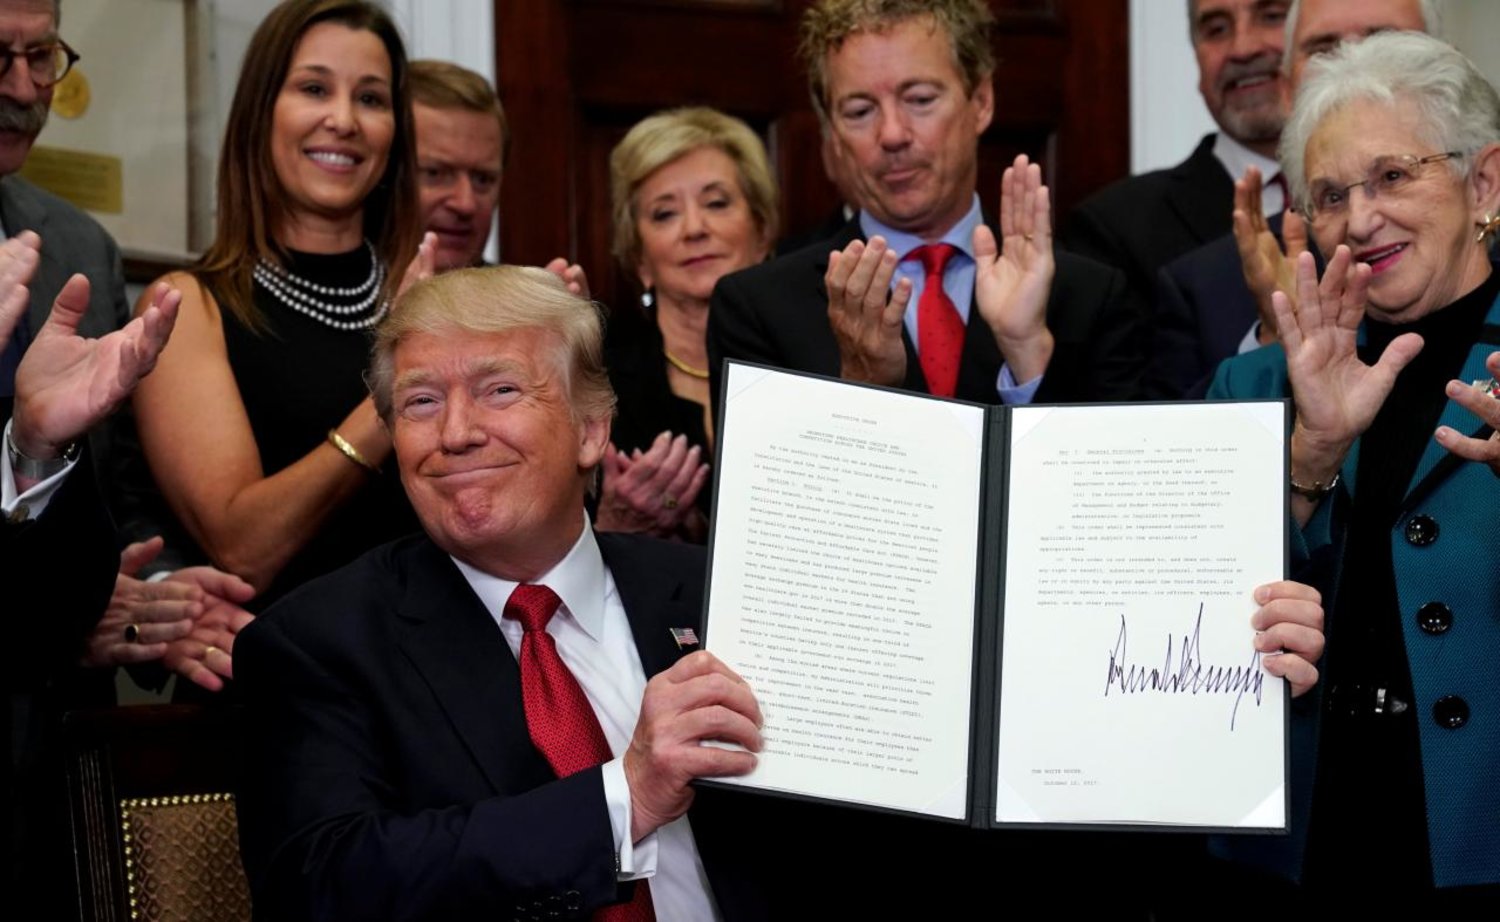 President Trump smiles after signing an Executive Order to make it easier for Americans to buy bare-bone health insurance plans and circumvent Obamacare, Reuters 